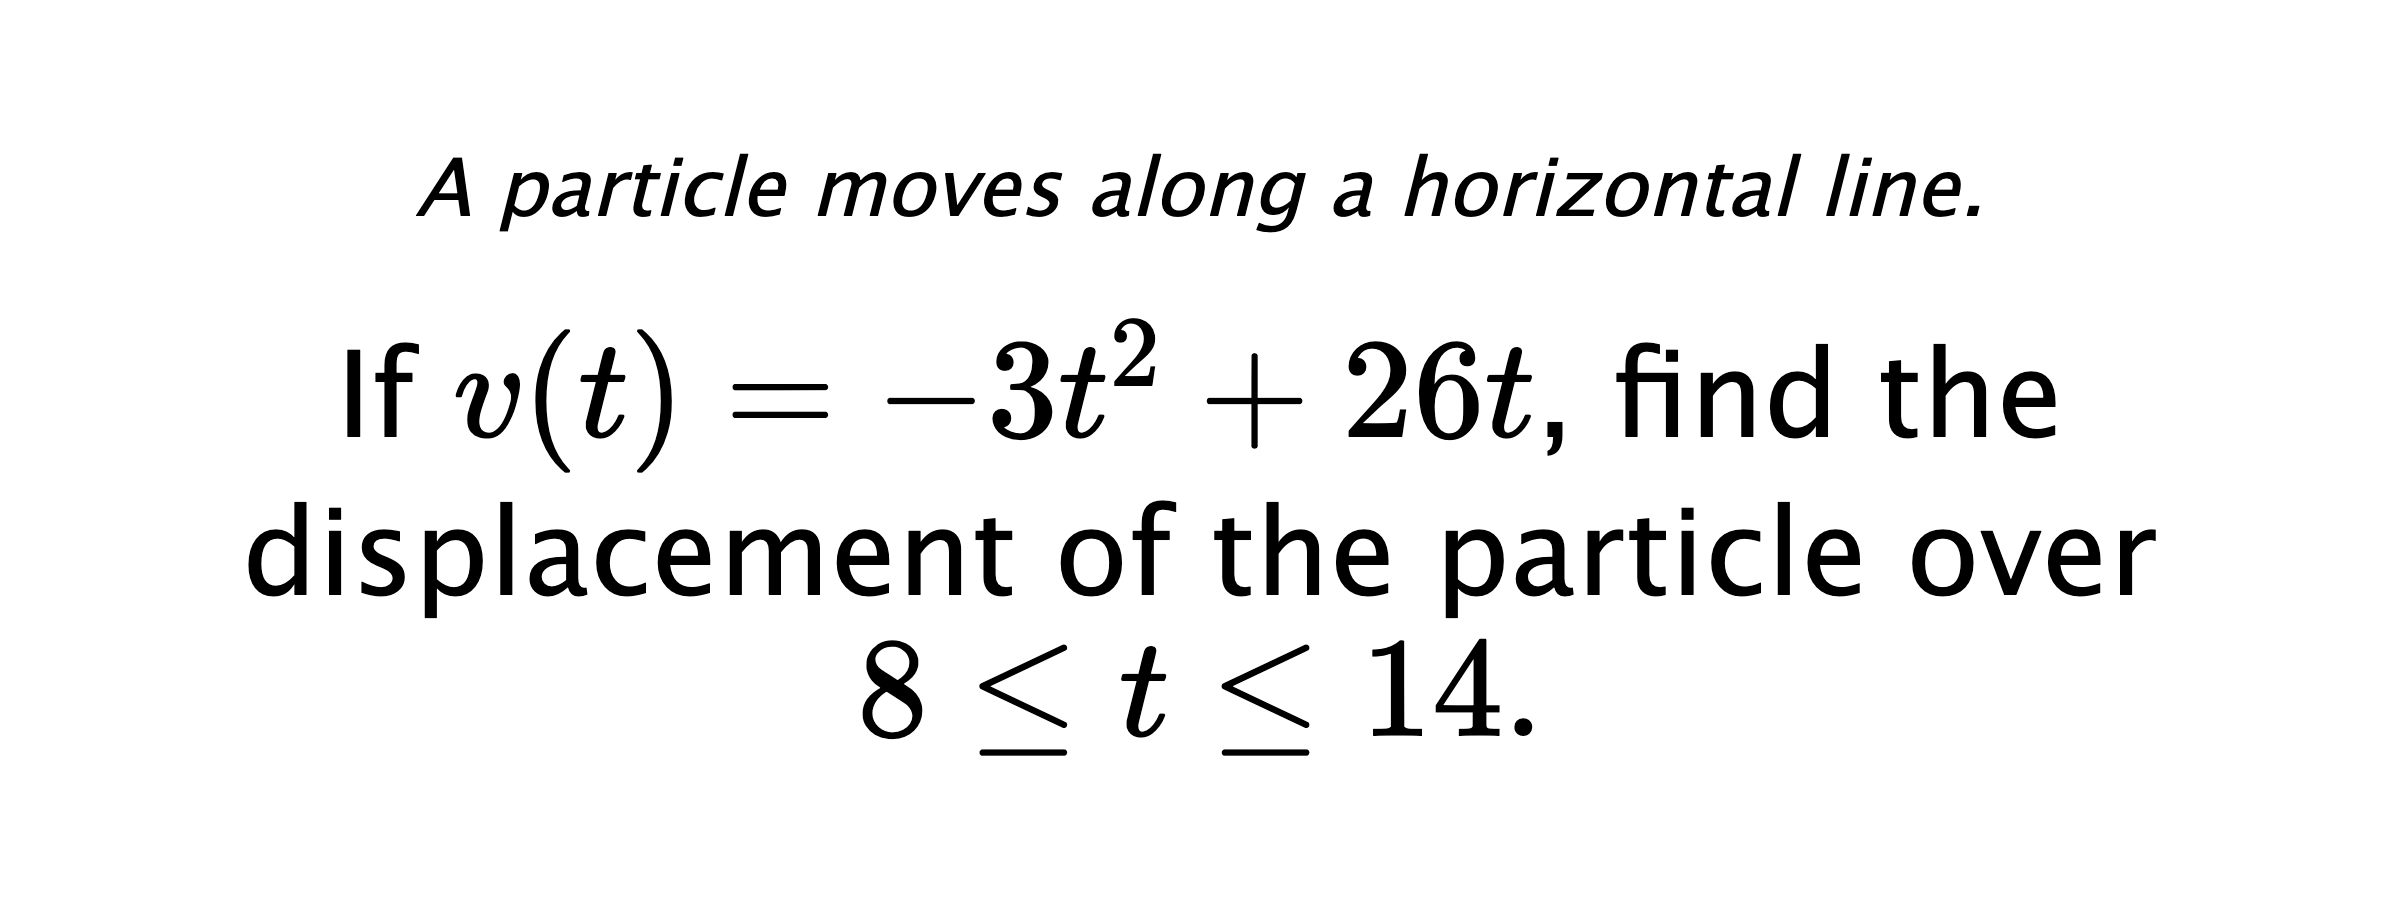 A particle moves along a horizontal line. If $ v(t)=-3t^2+26t $, find the displacement of the particle over $ 8 \leq t \leq 14 .$